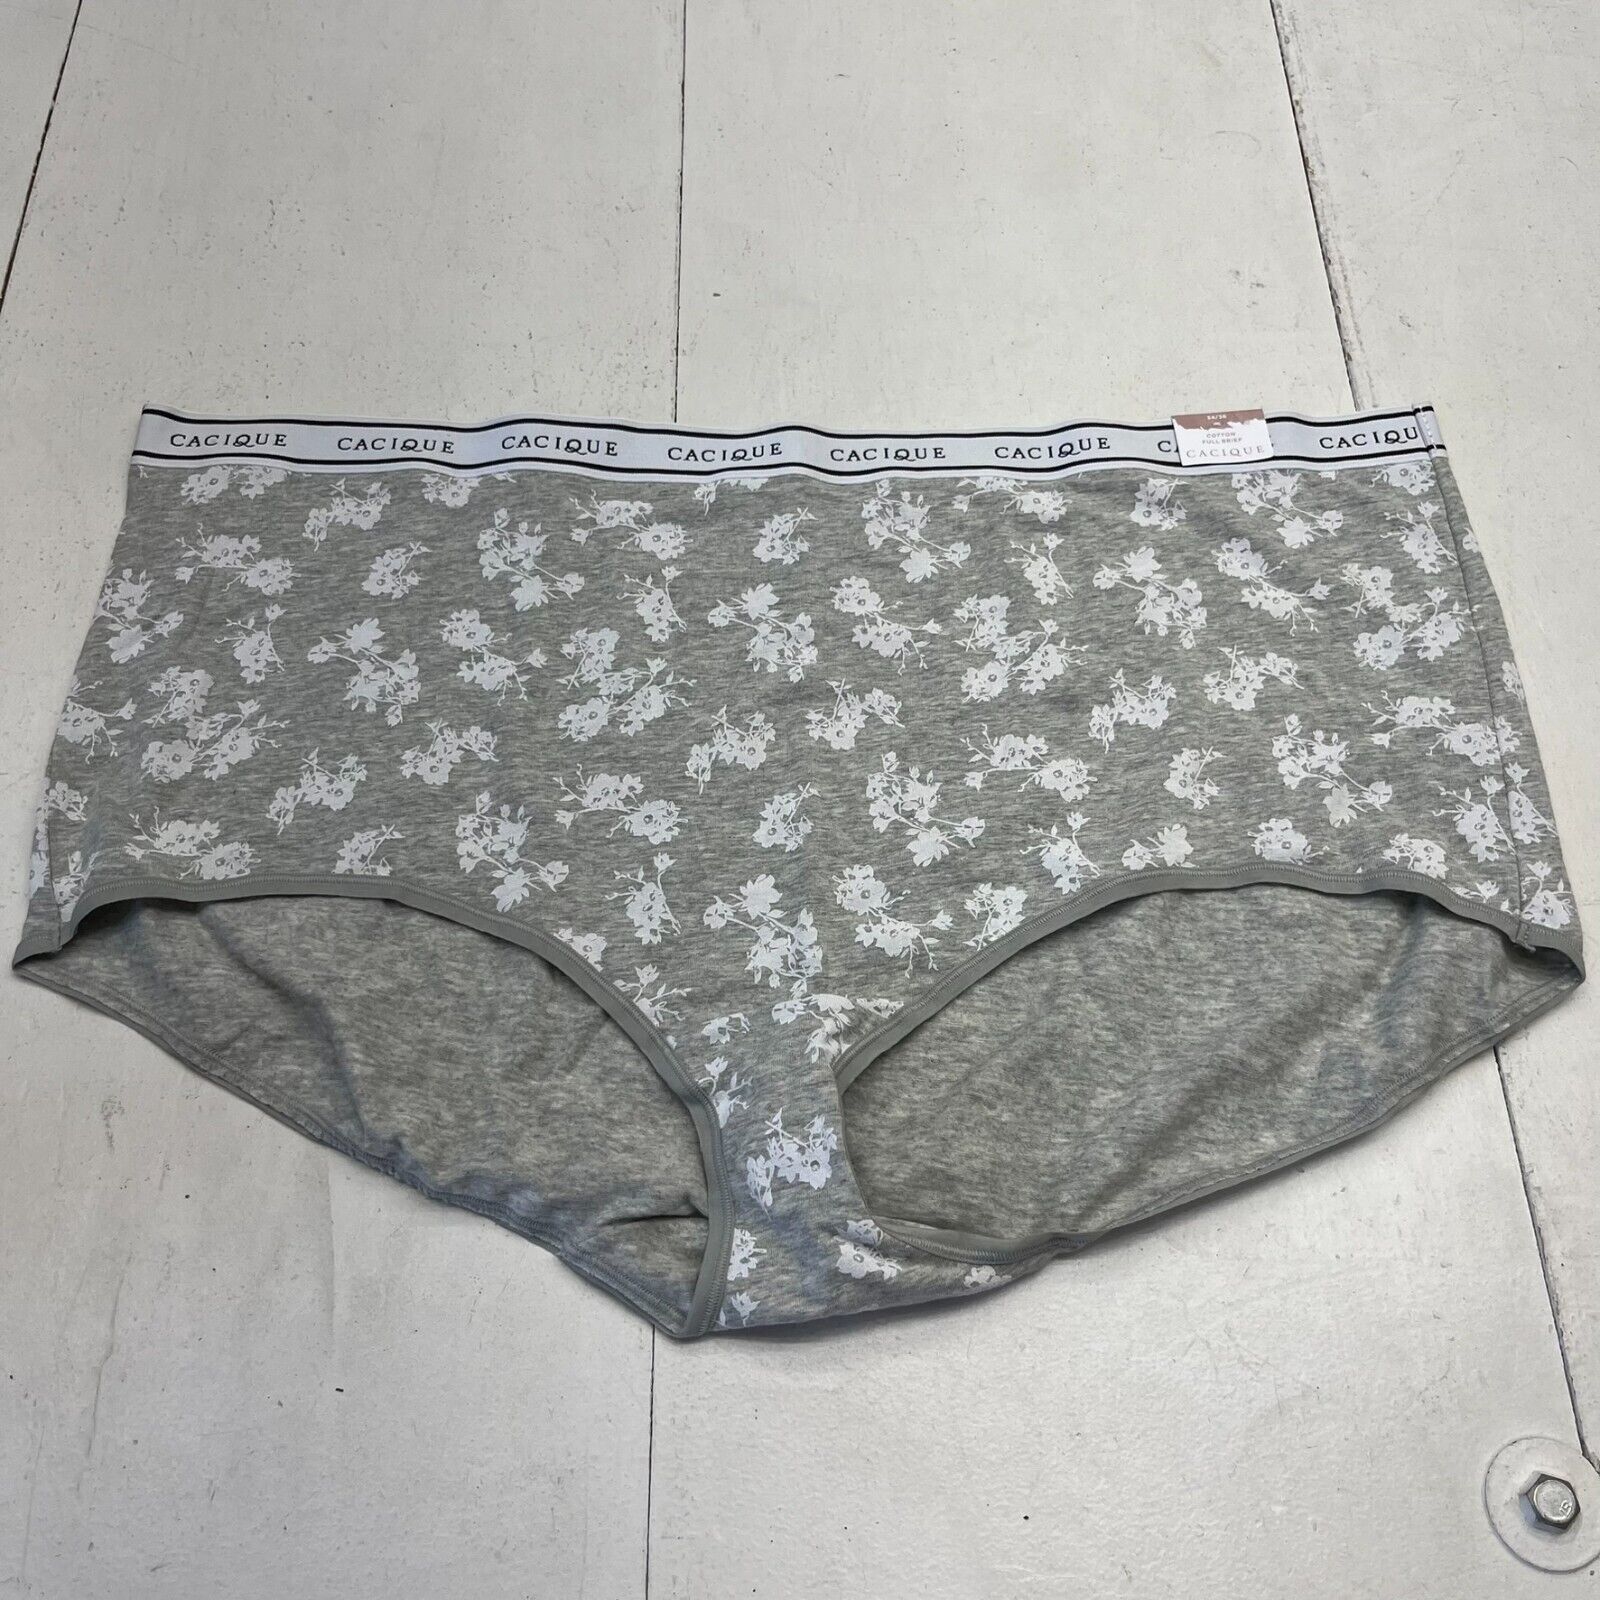 Cacique Gray Floral Print Full Brief Underwear Women's Size 34/36 NEW